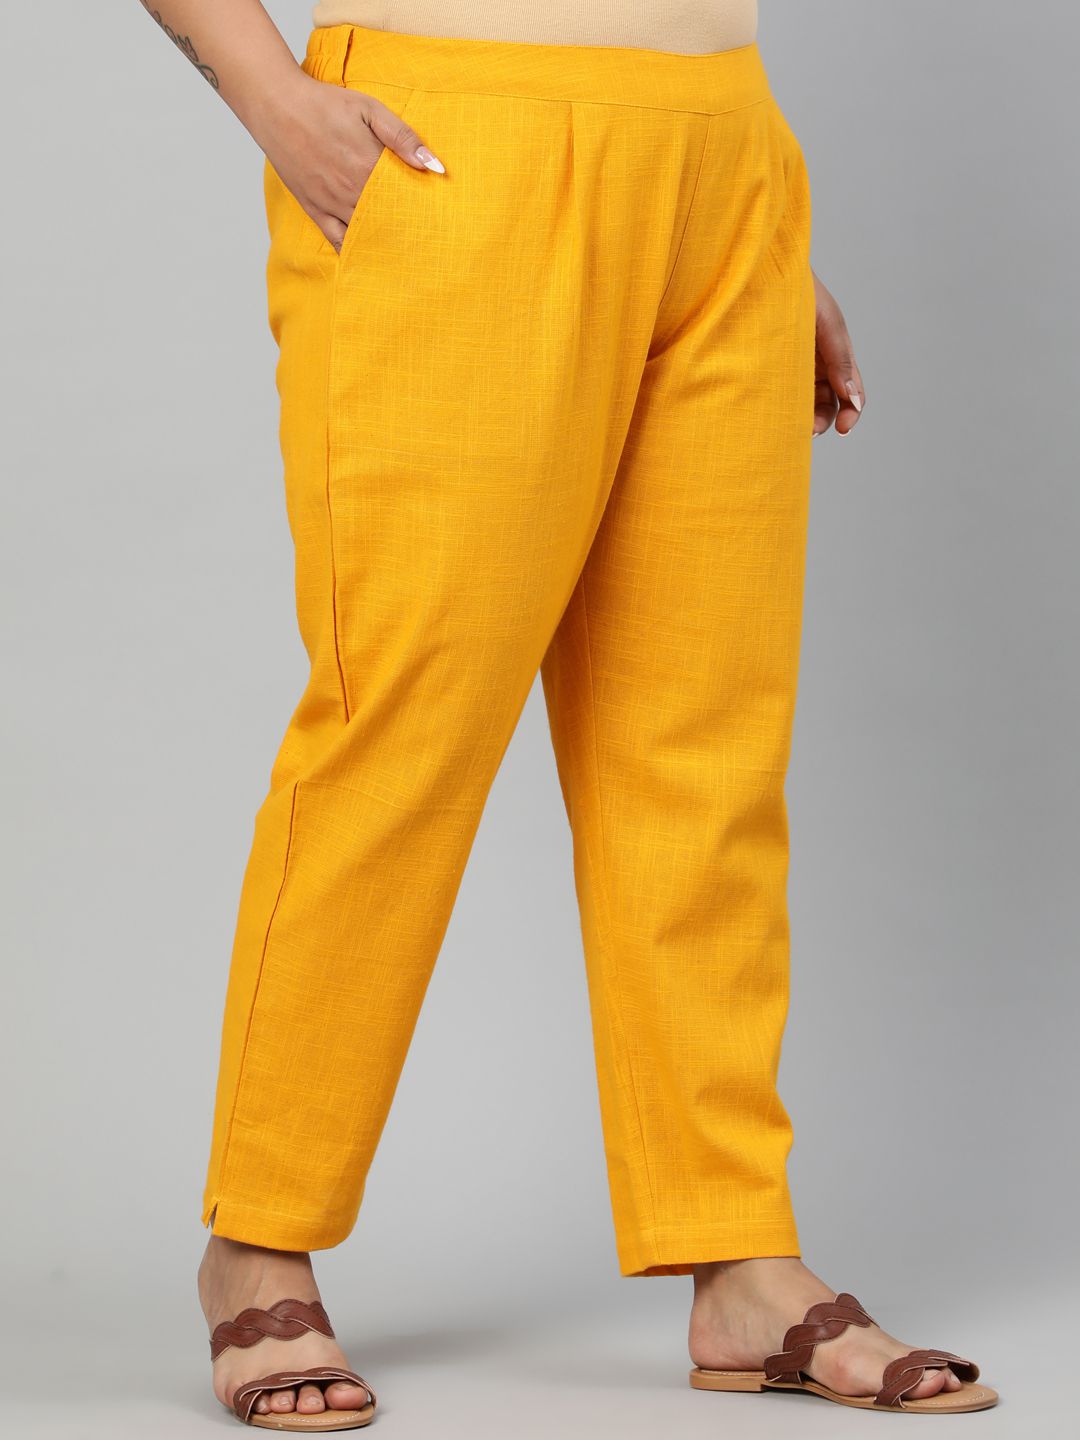 Buy Ankle Length pants for Women